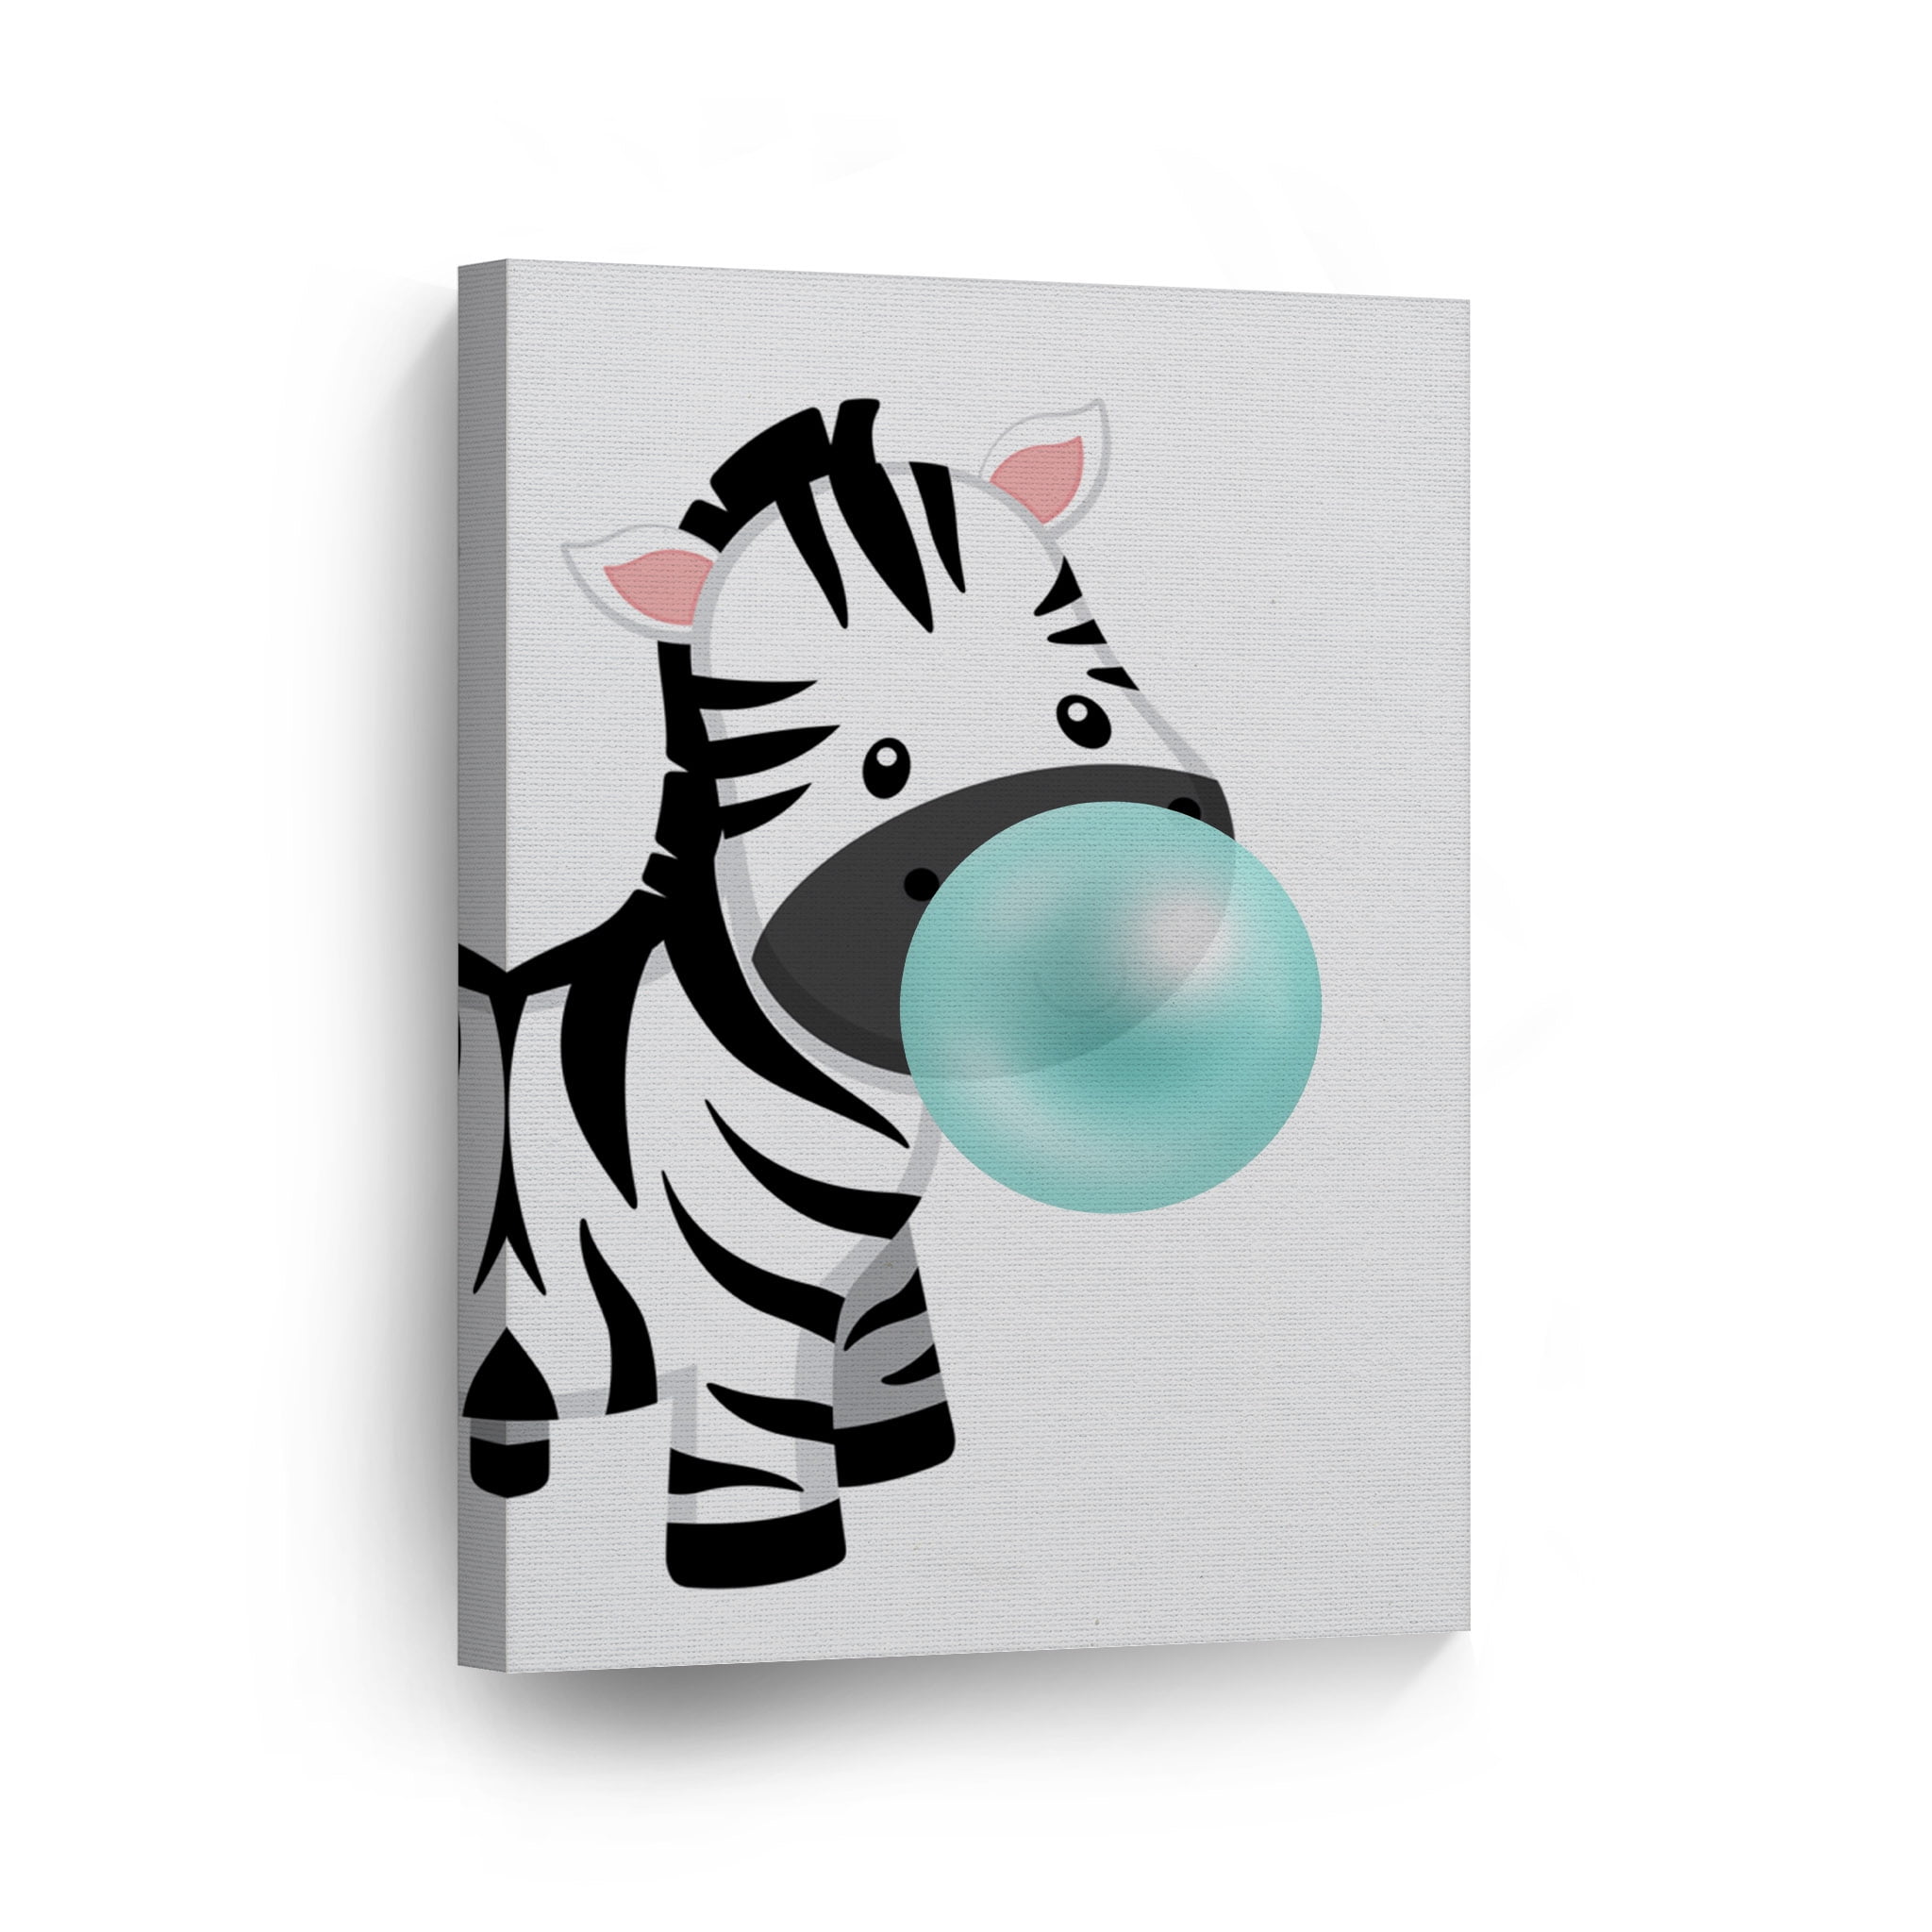 Smile Art Design Cute Zebra Animal Bubble Gum Art Teal Blue Chewing Gum  CANVAS PRINT Black and White Wall Art Home Pop Art Living Room Kids Room  Decor Nursery Ready to Hang Made in USA 36x24